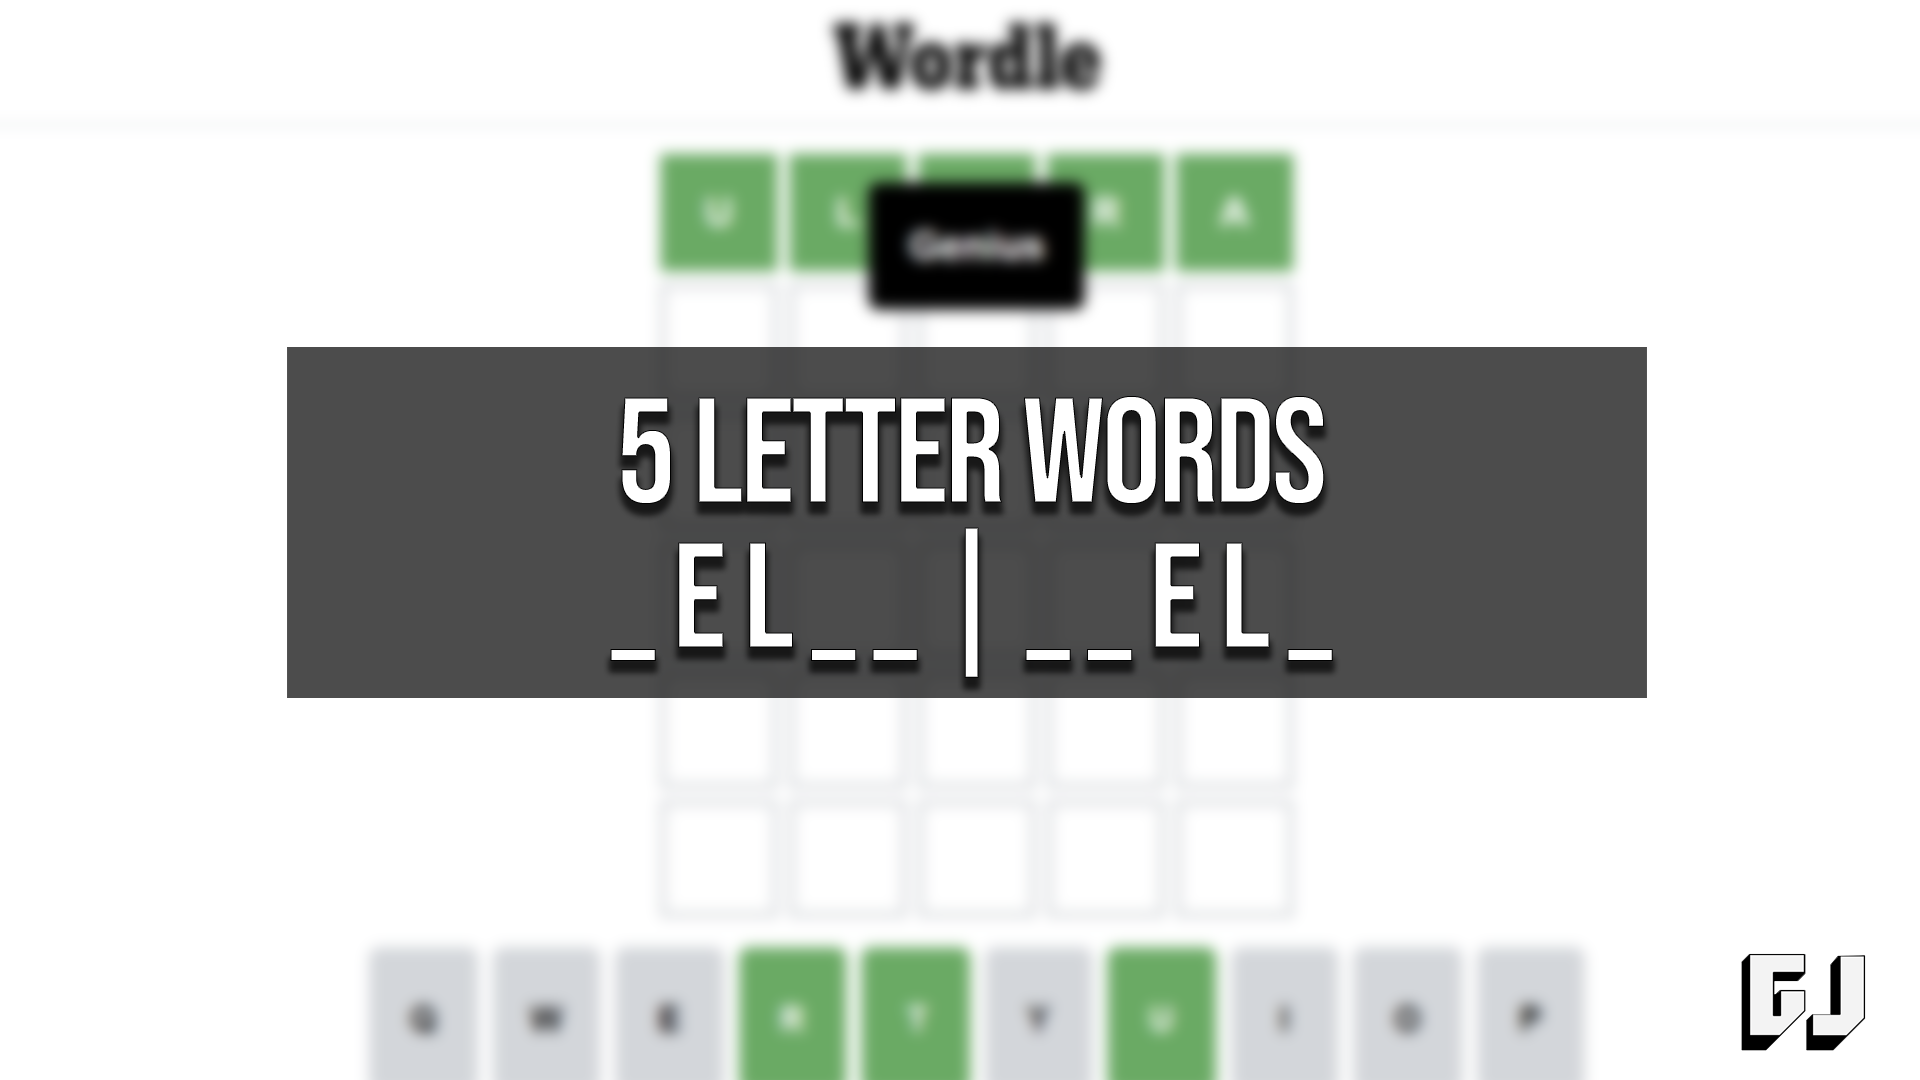 5 letter words with el in the middle